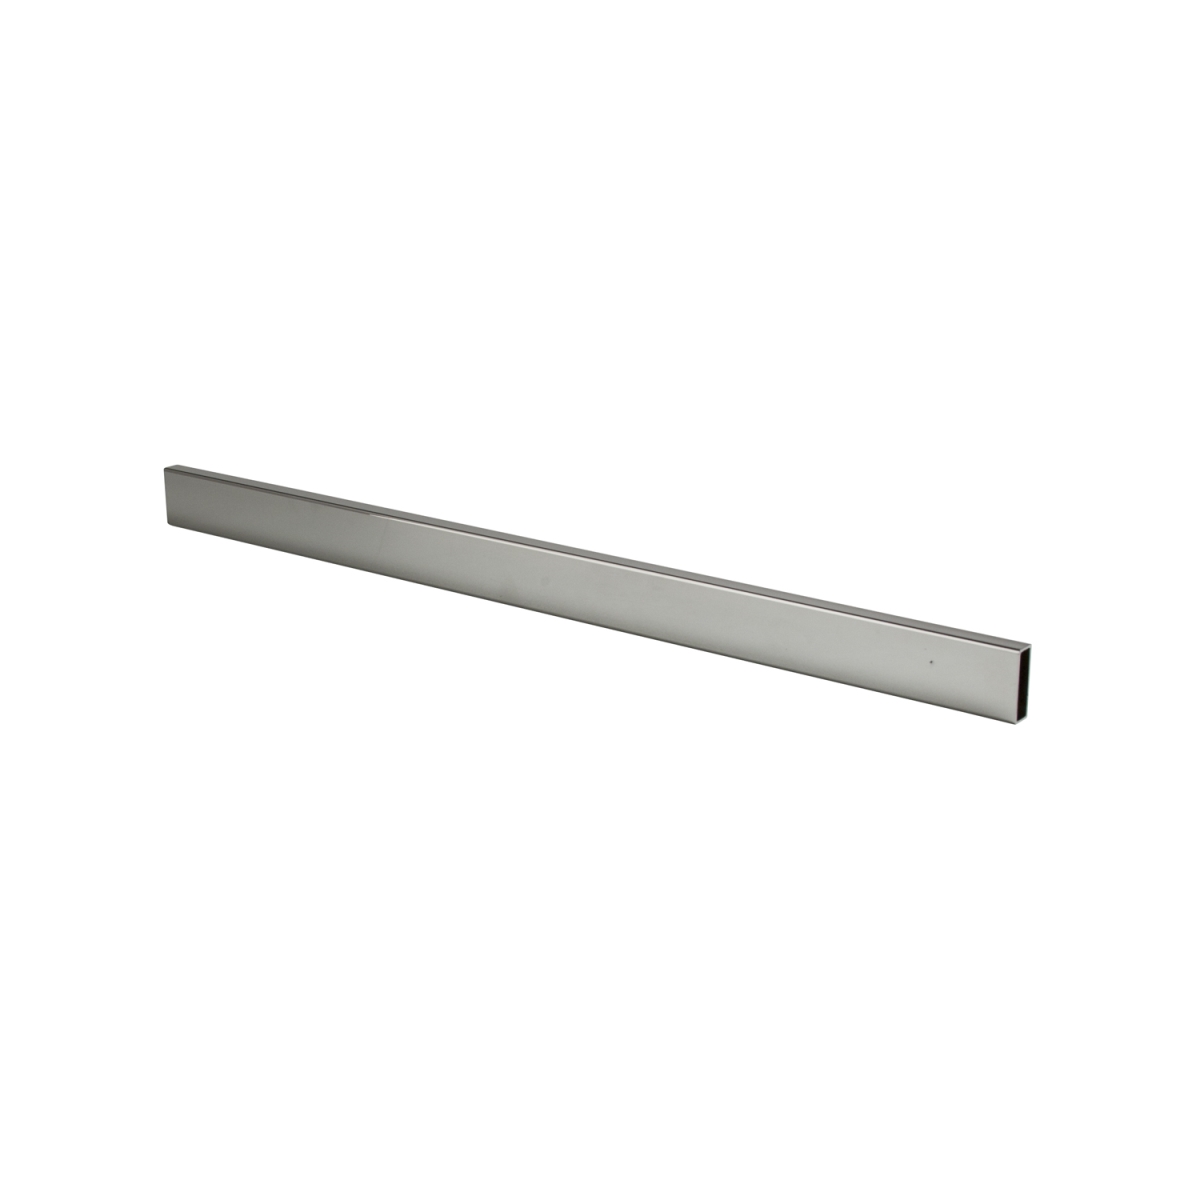 Picture of Econoco RE4 4 ft. x 0.5 x 1.5 in. Rectangular Tubing - Chrome